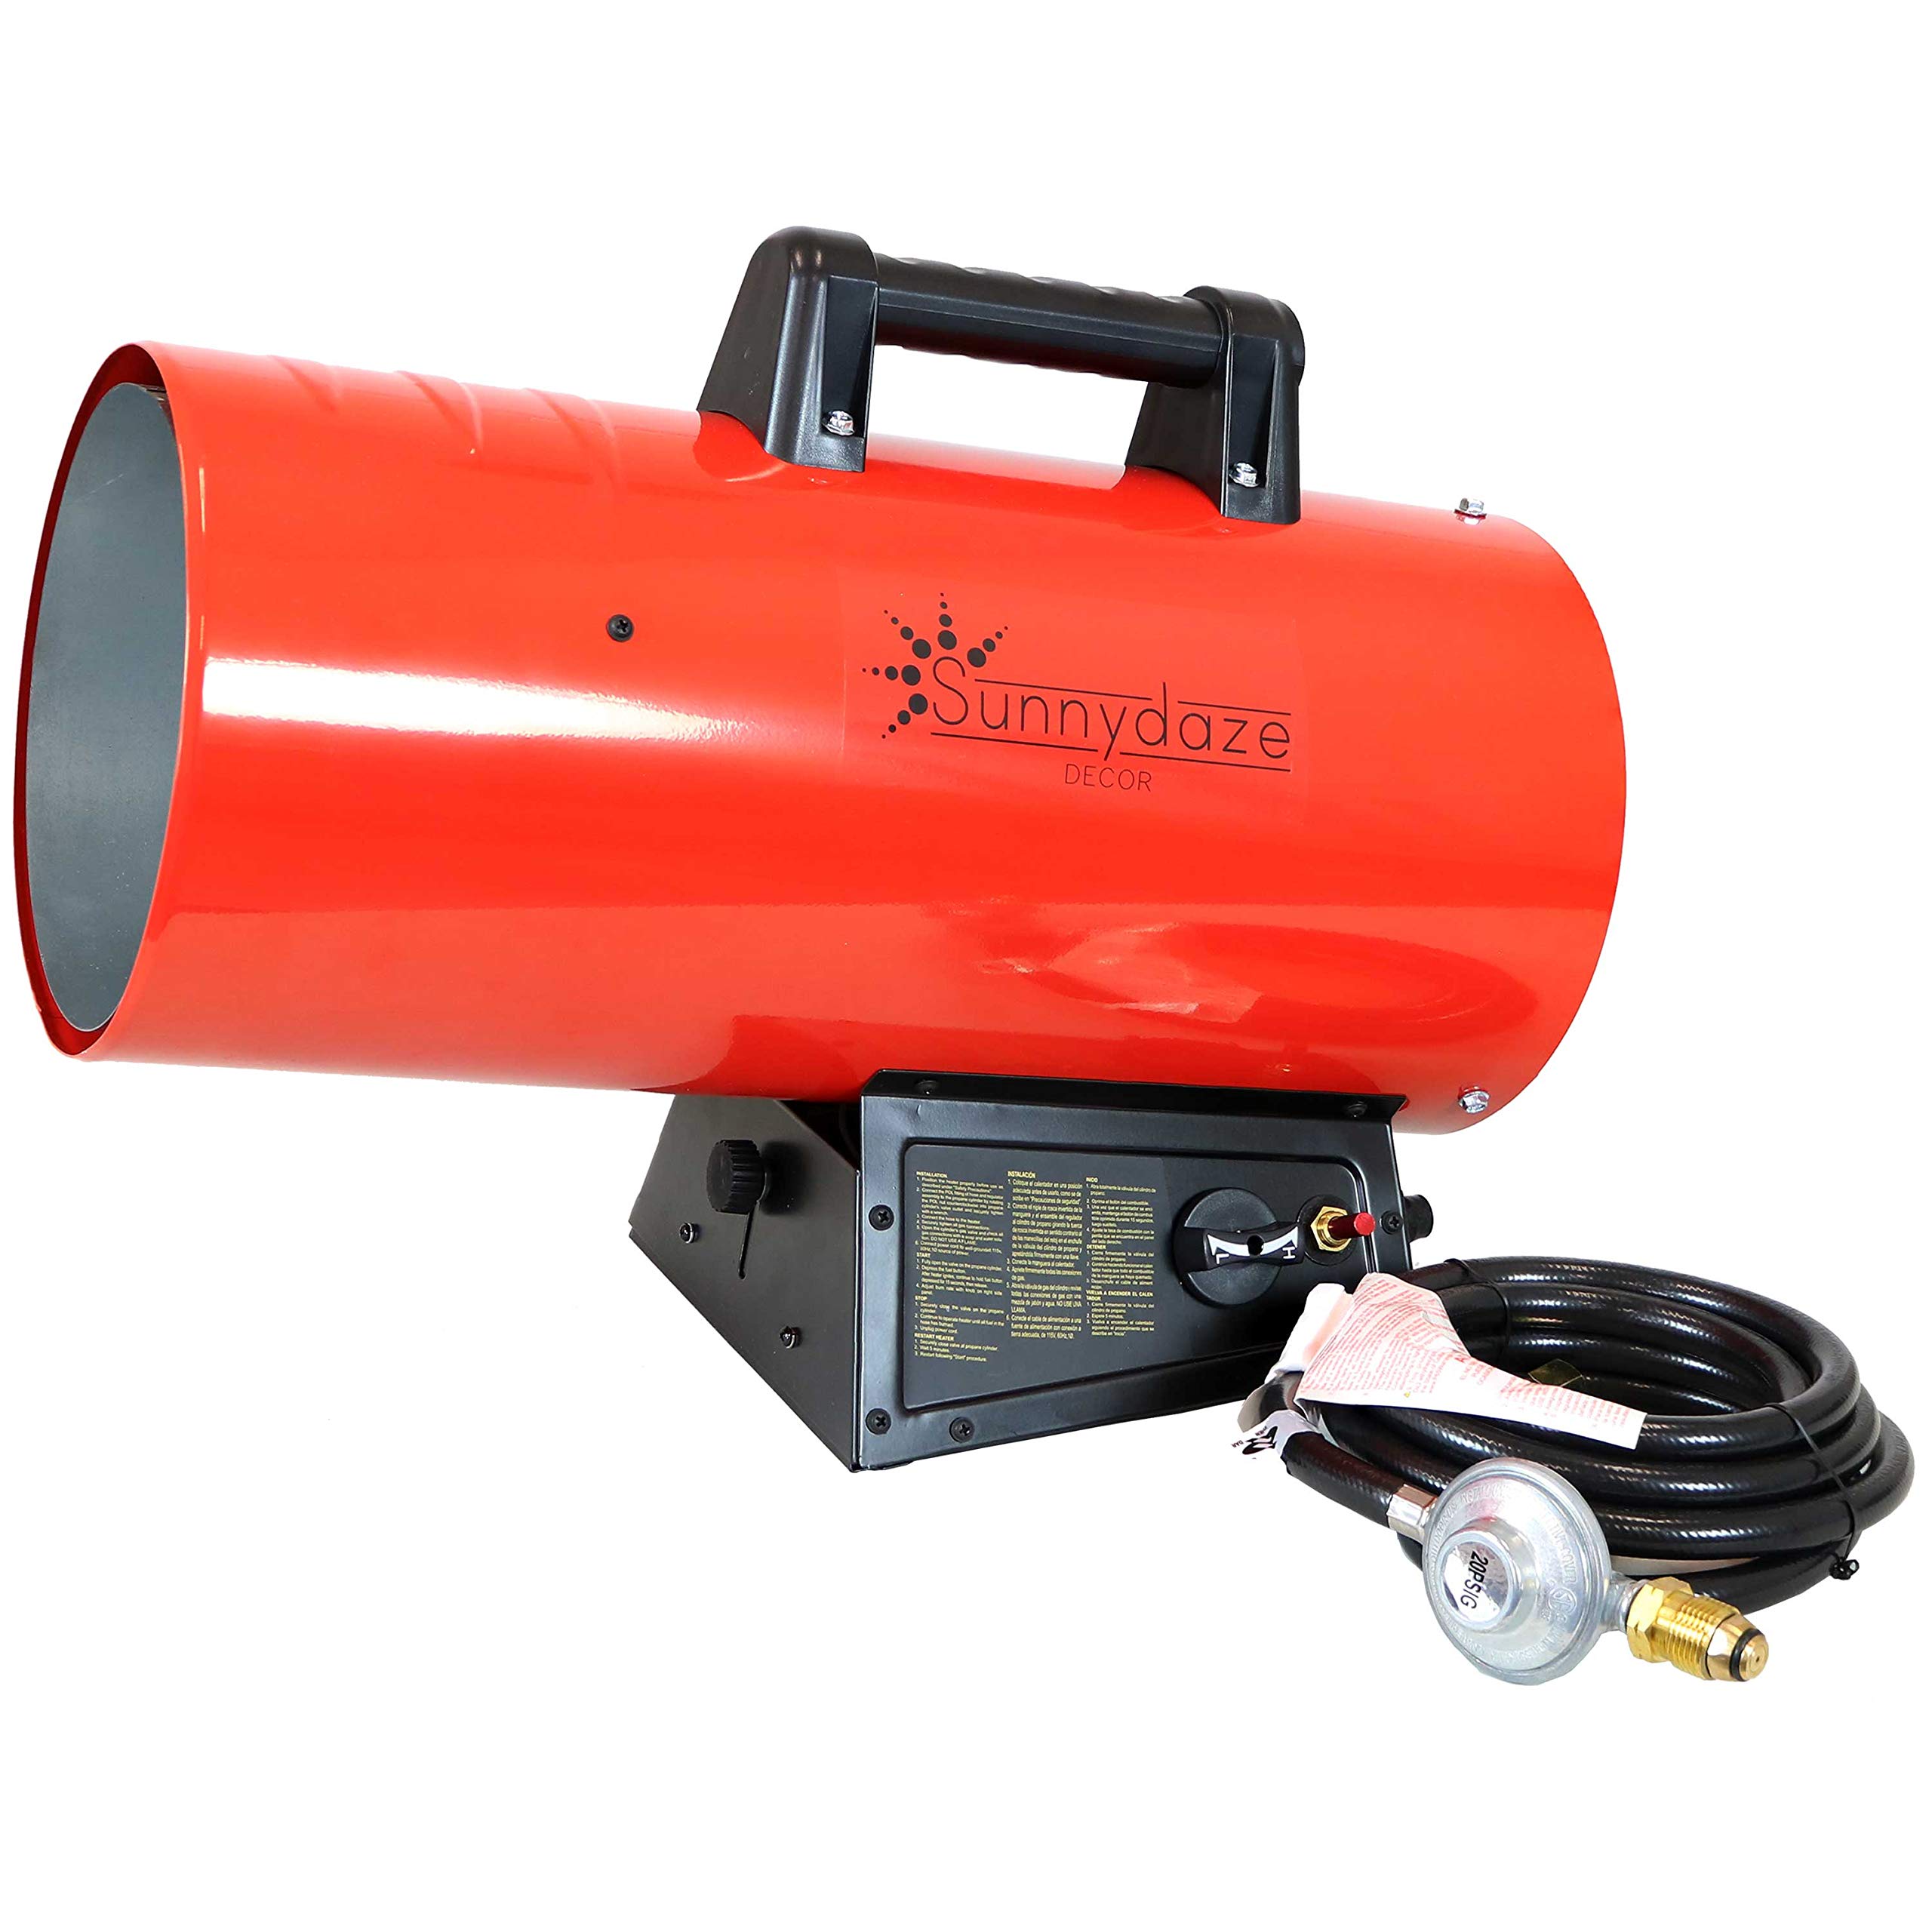 Sunnydaze 125000 BTU Forced Air Propane Heater - Portable Heat for Construction Sites - Auto-Shutoff for Overheating Protect